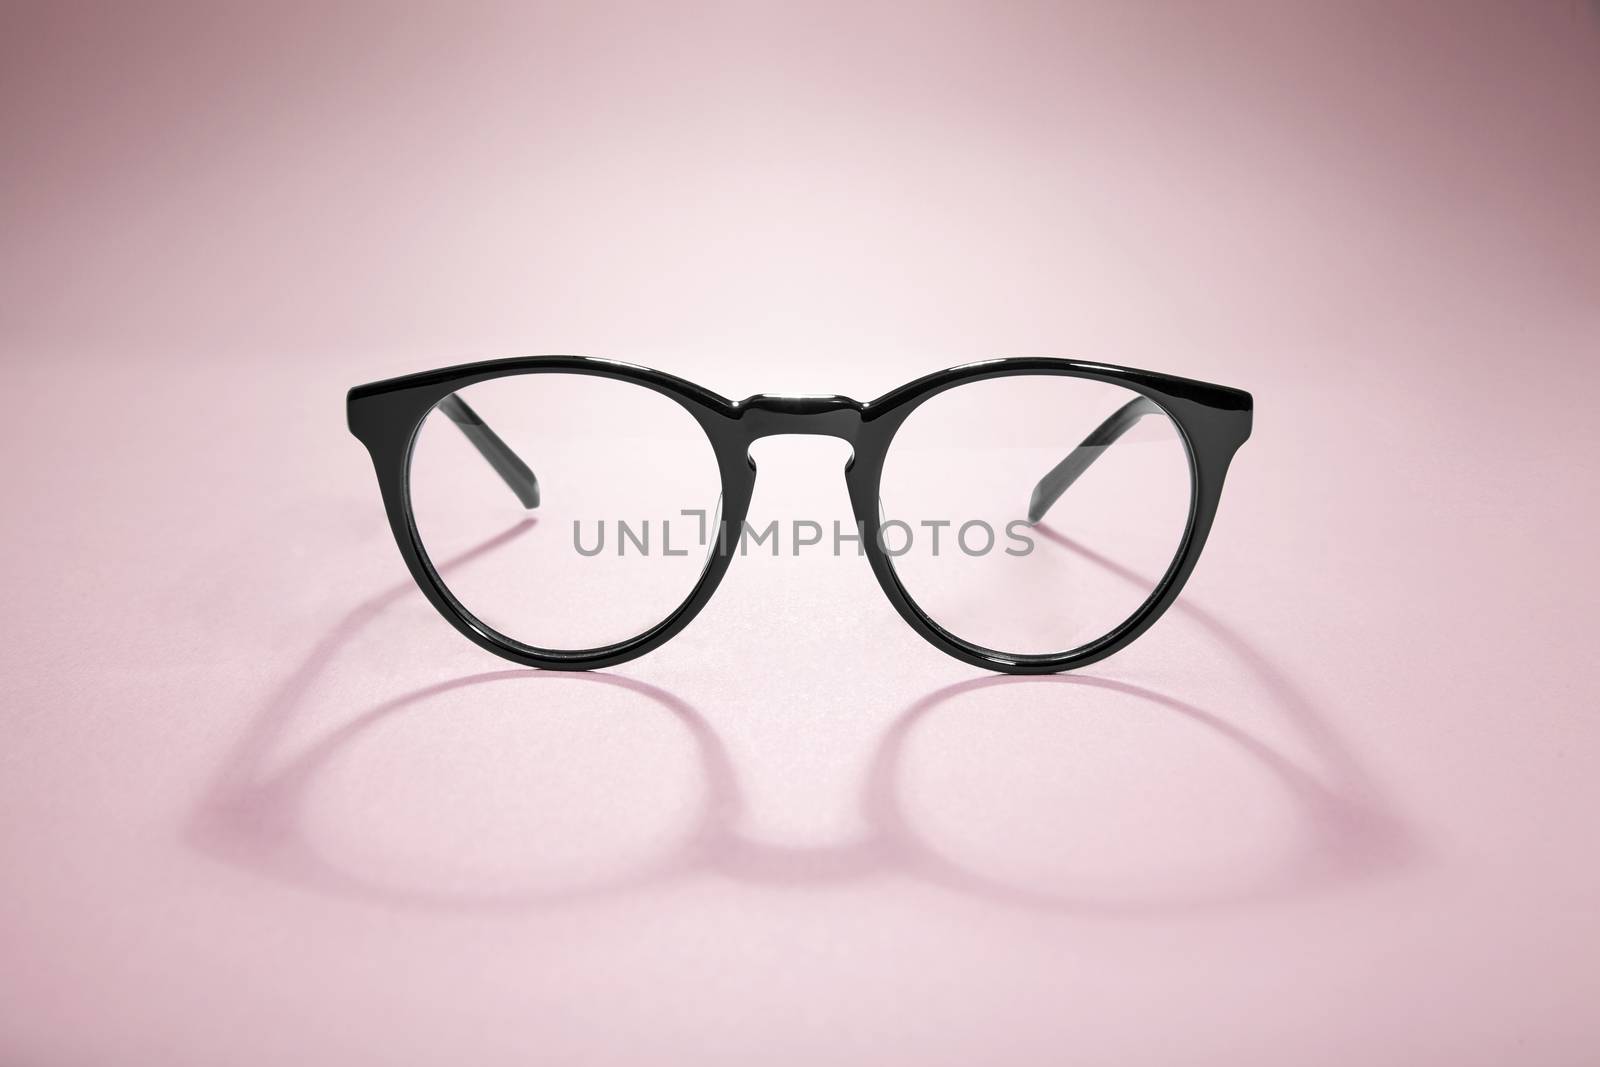 Black Glasses on Pink by filipw